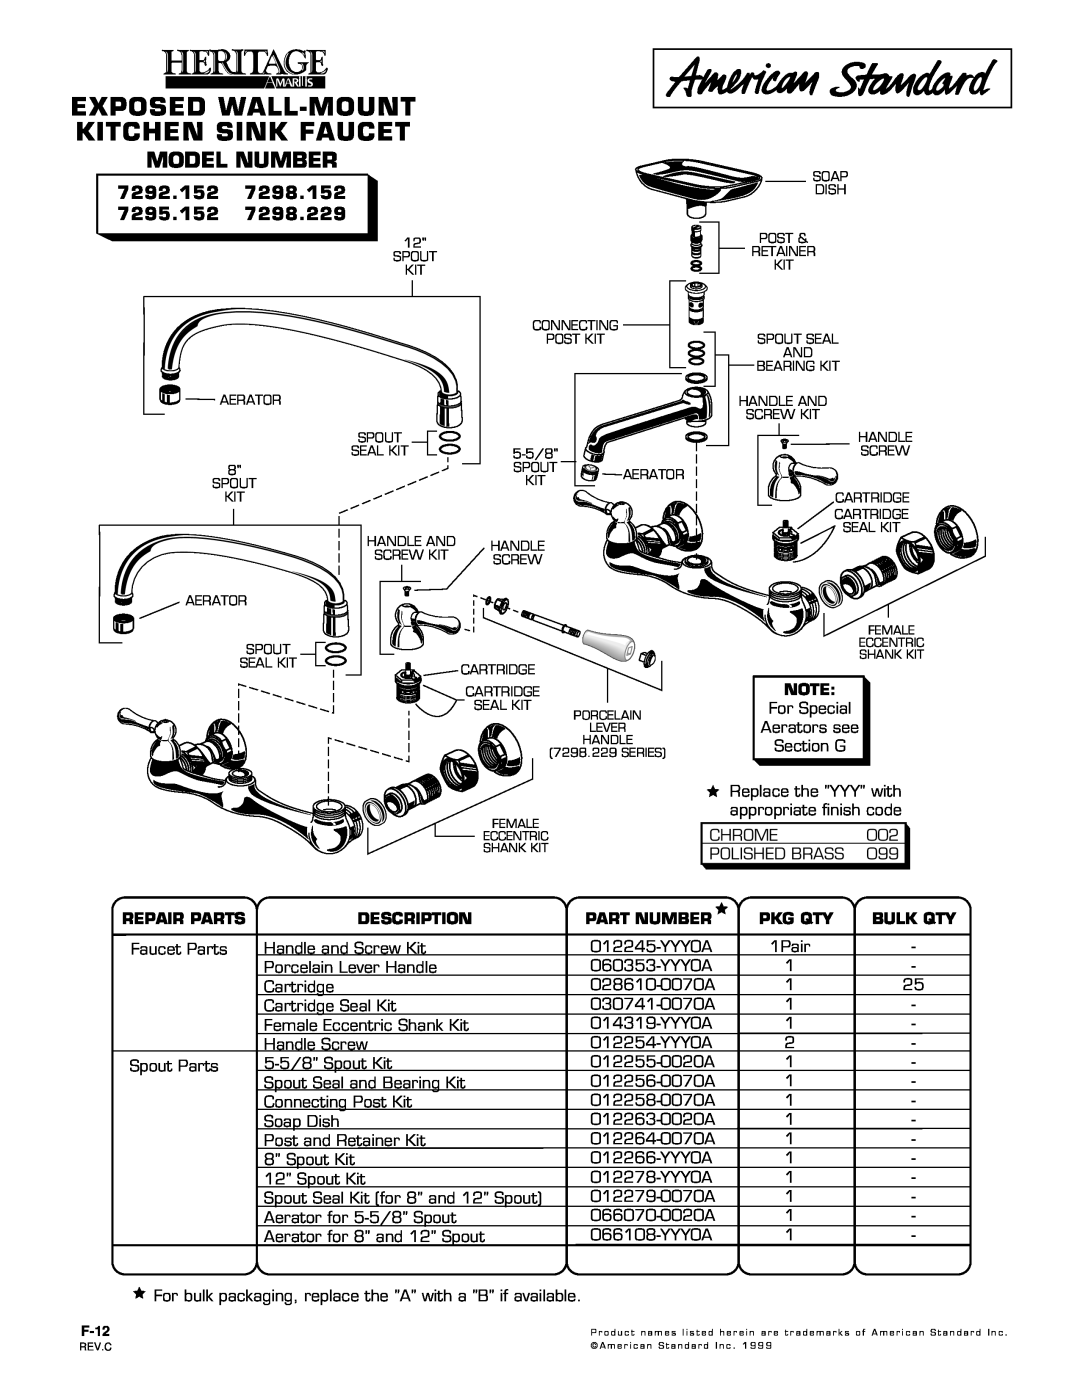 American Standard 7298.229 manual Exposed Wall-Mount Kitchen Sink Faucet, Model Number, 7292.152, Repair Parts, Pkg Qty 